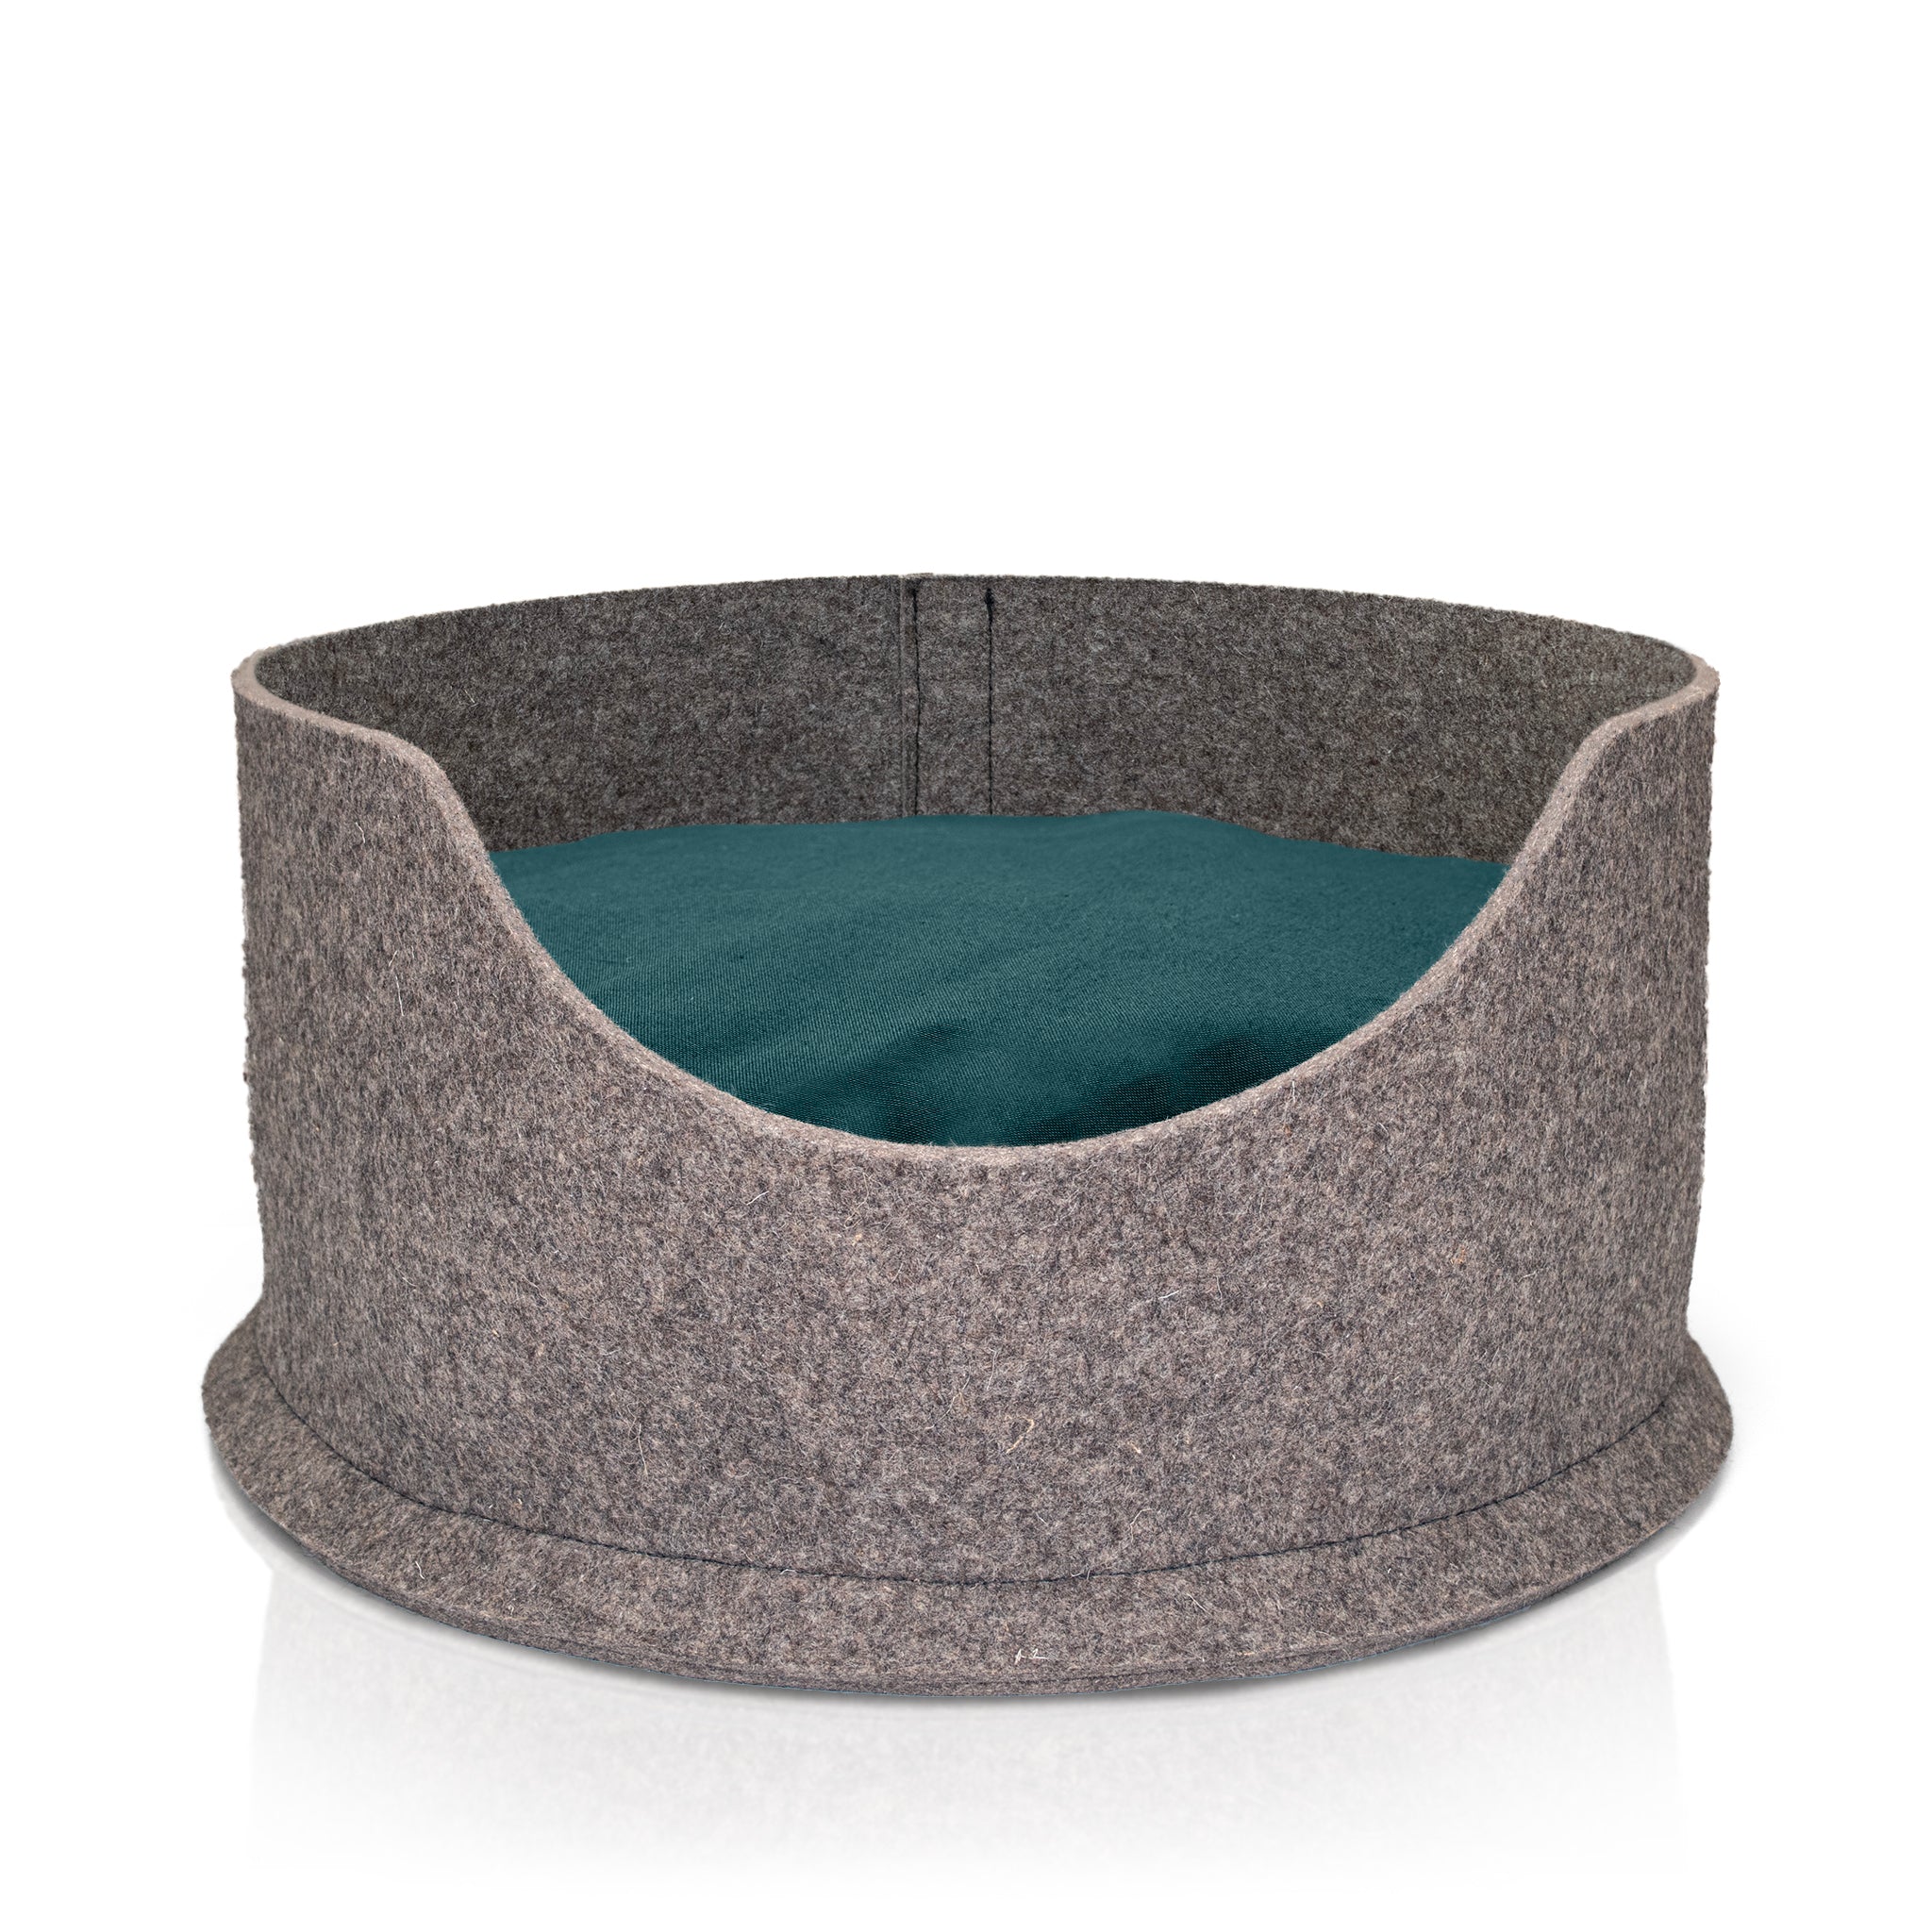 Eco-friendly cat and dog bed with a green cushion